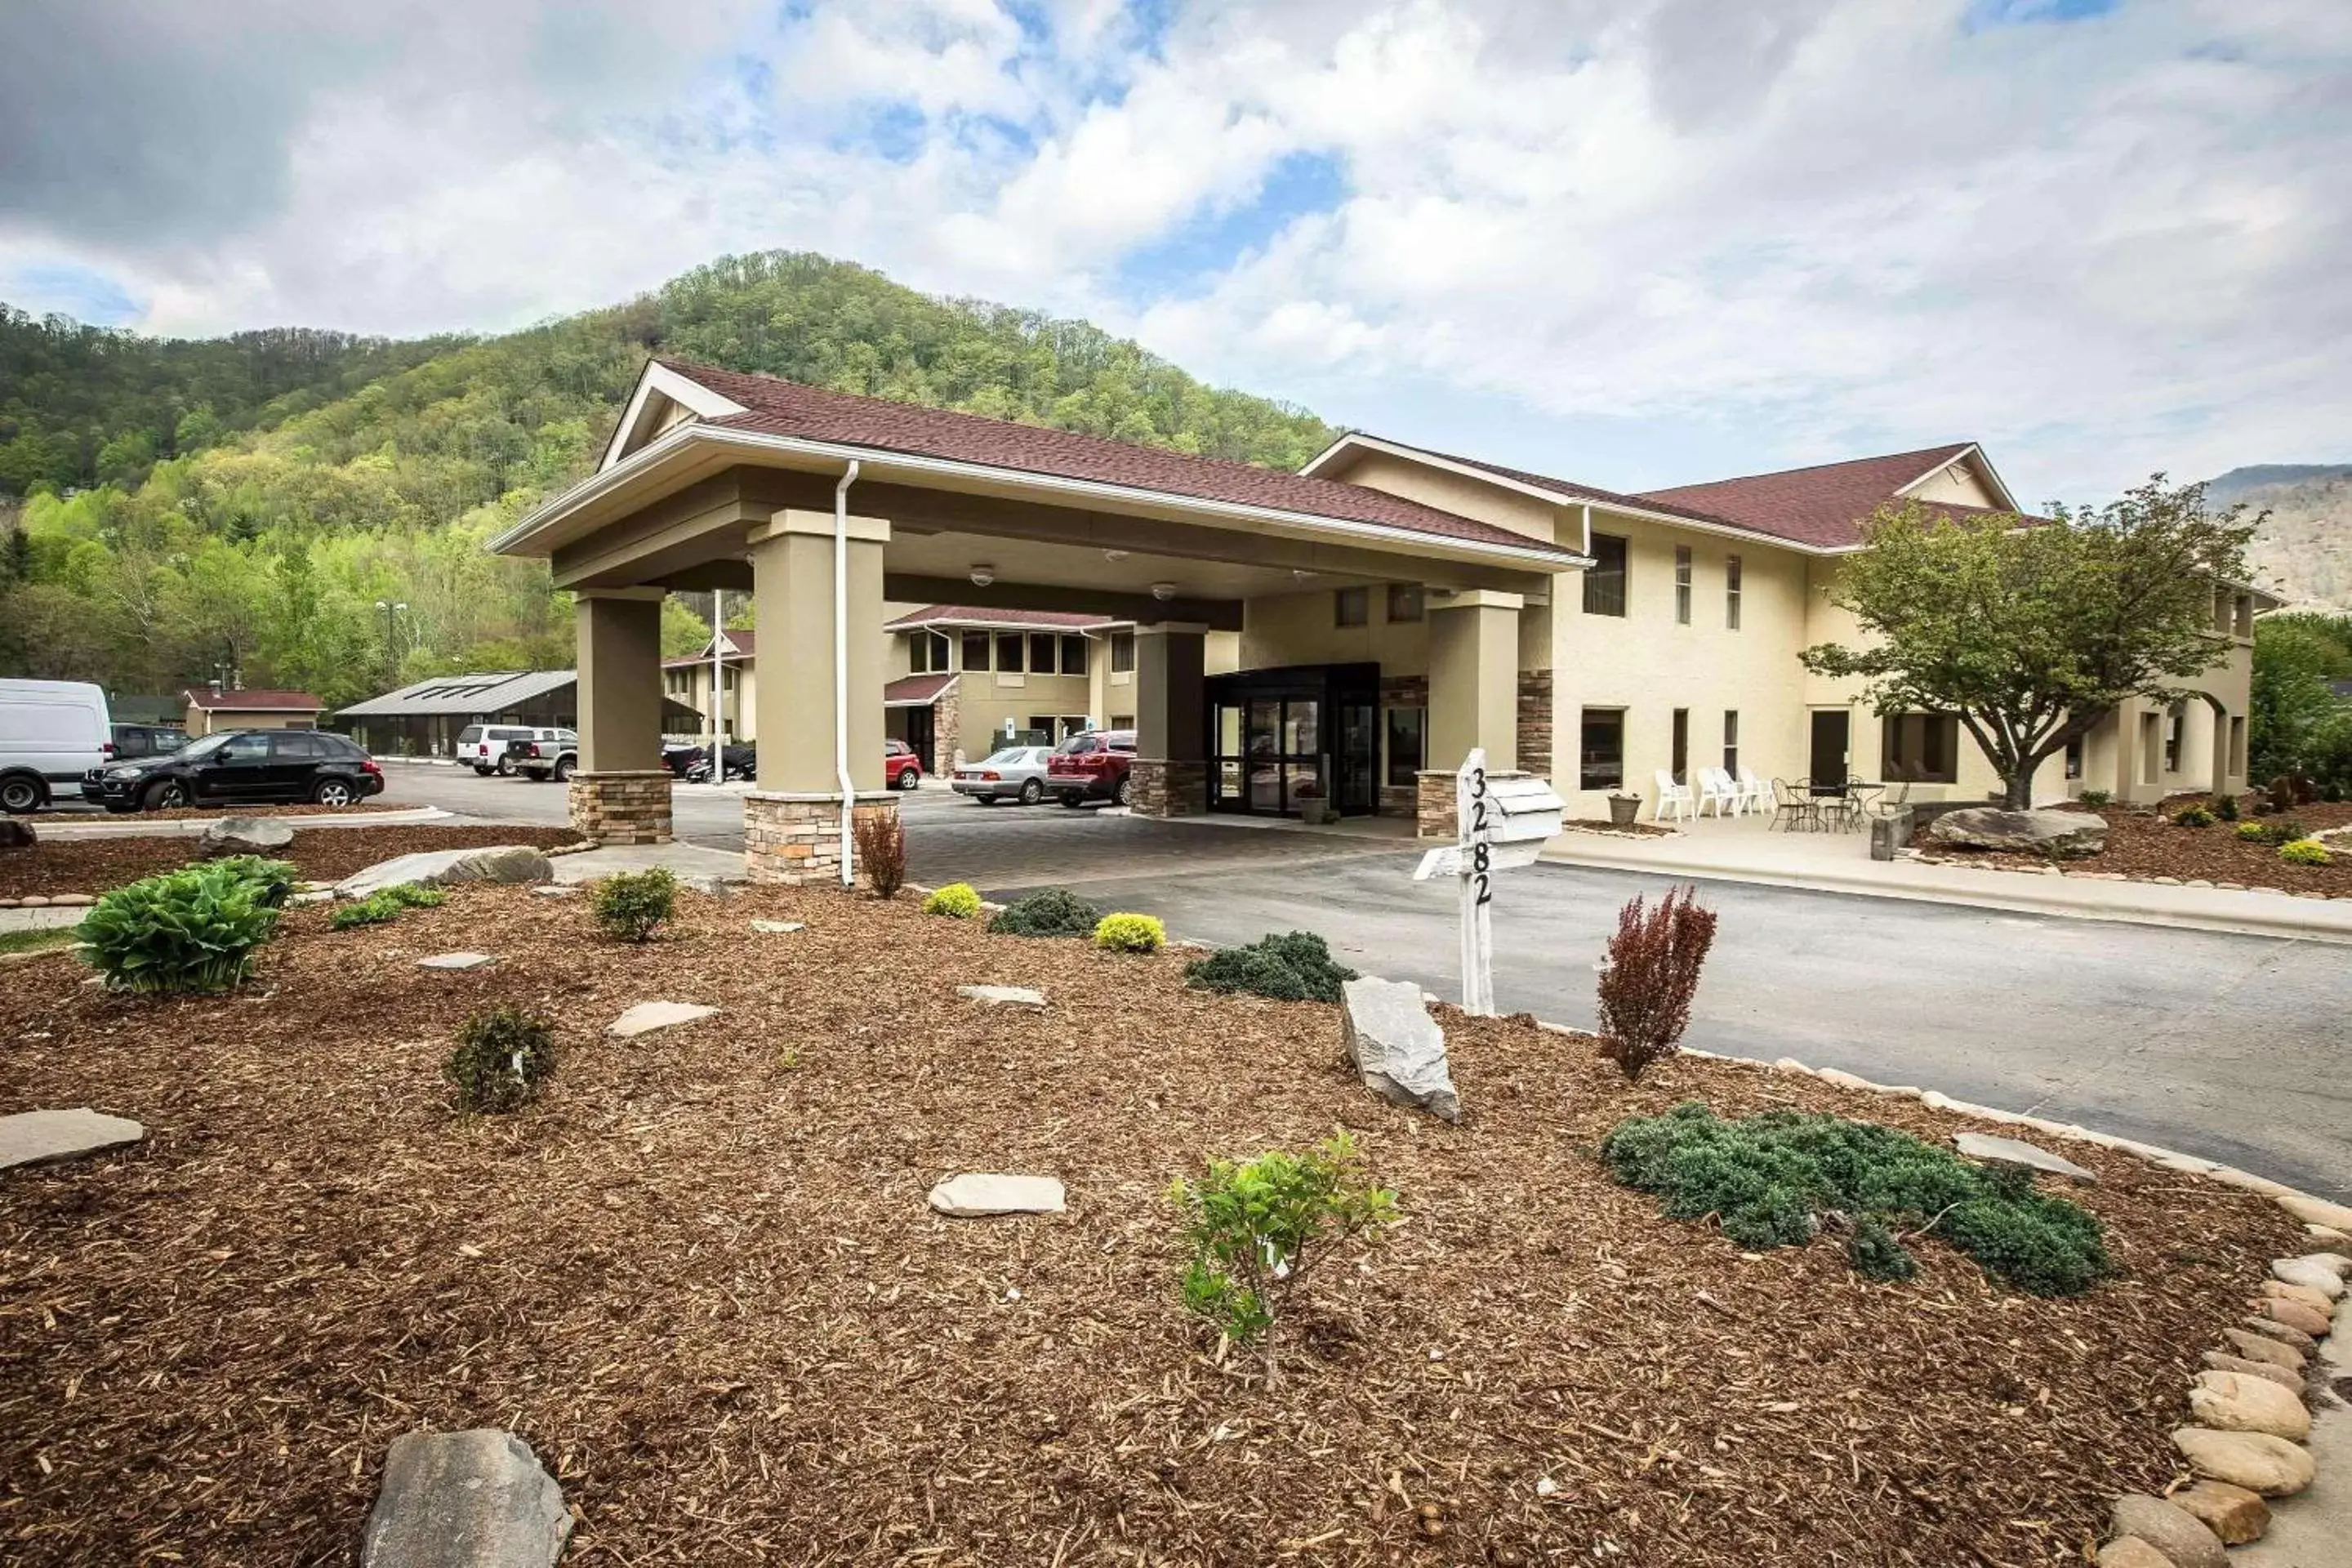 Property building in Comfort Inn near Great Smoky Mountain National Park